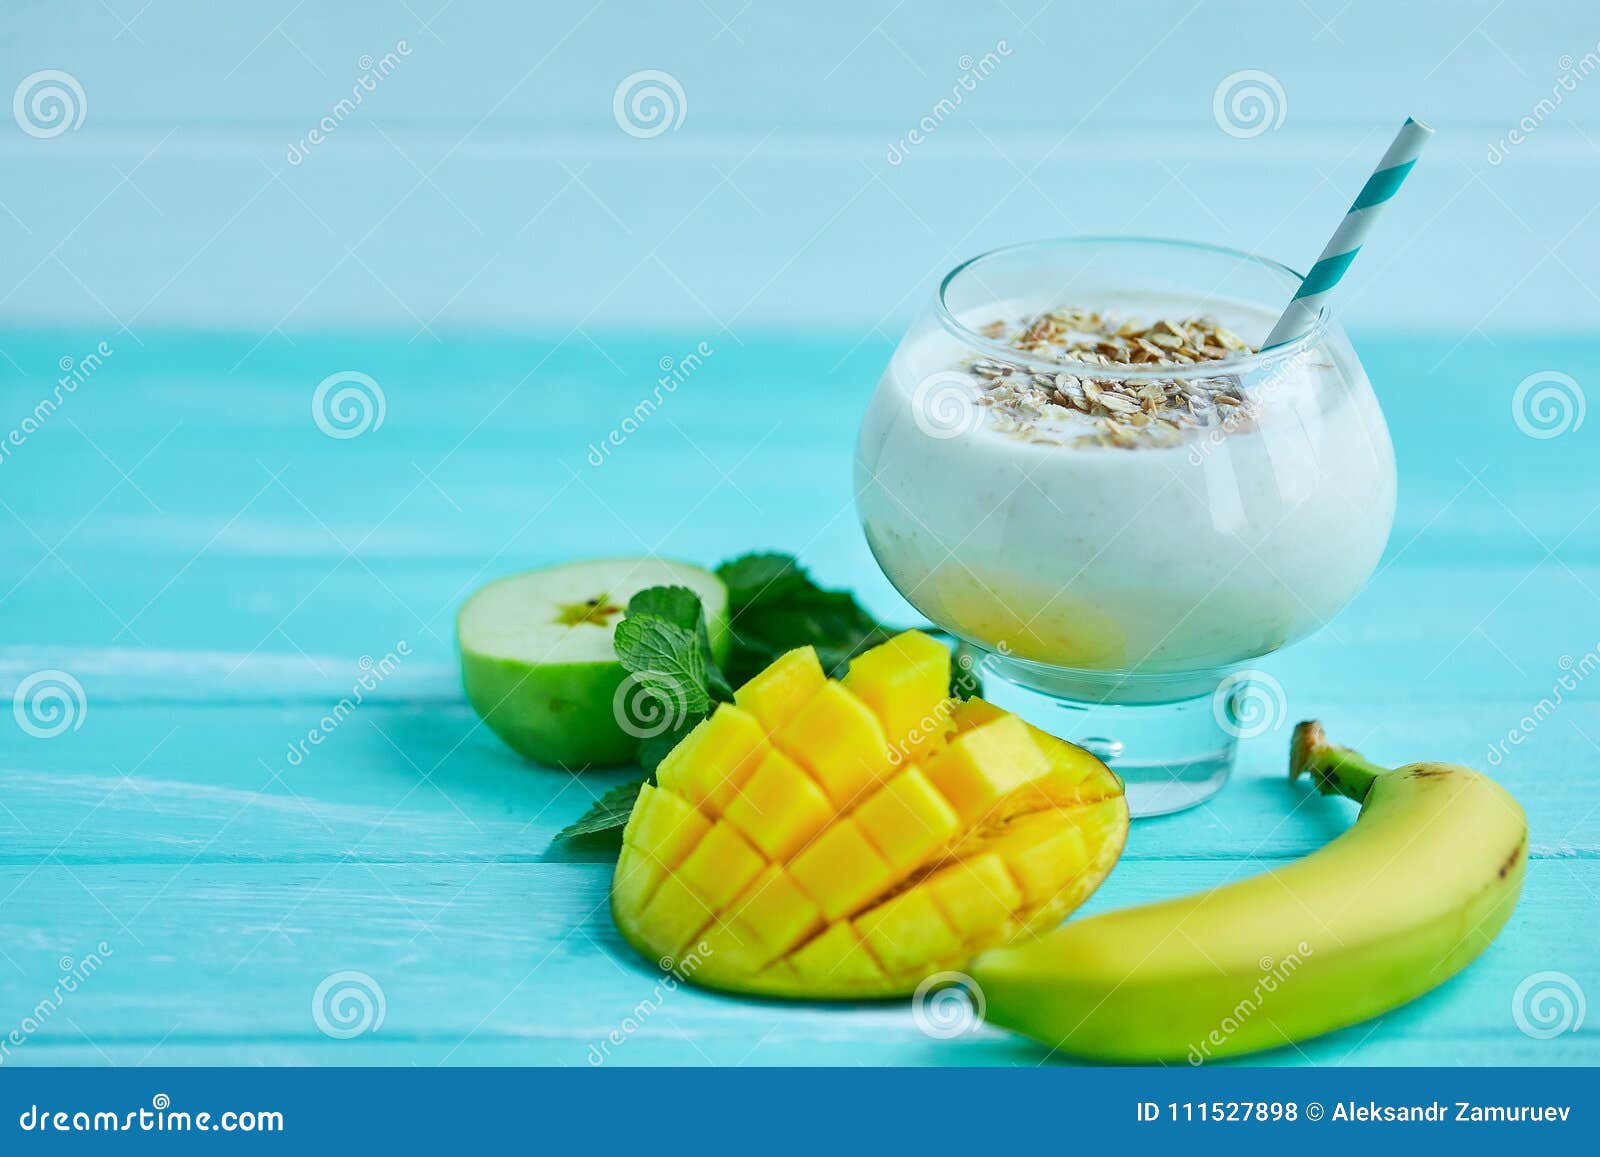 Overnight Oats with Mango and Coconut Stock Photo - Image of glass ...